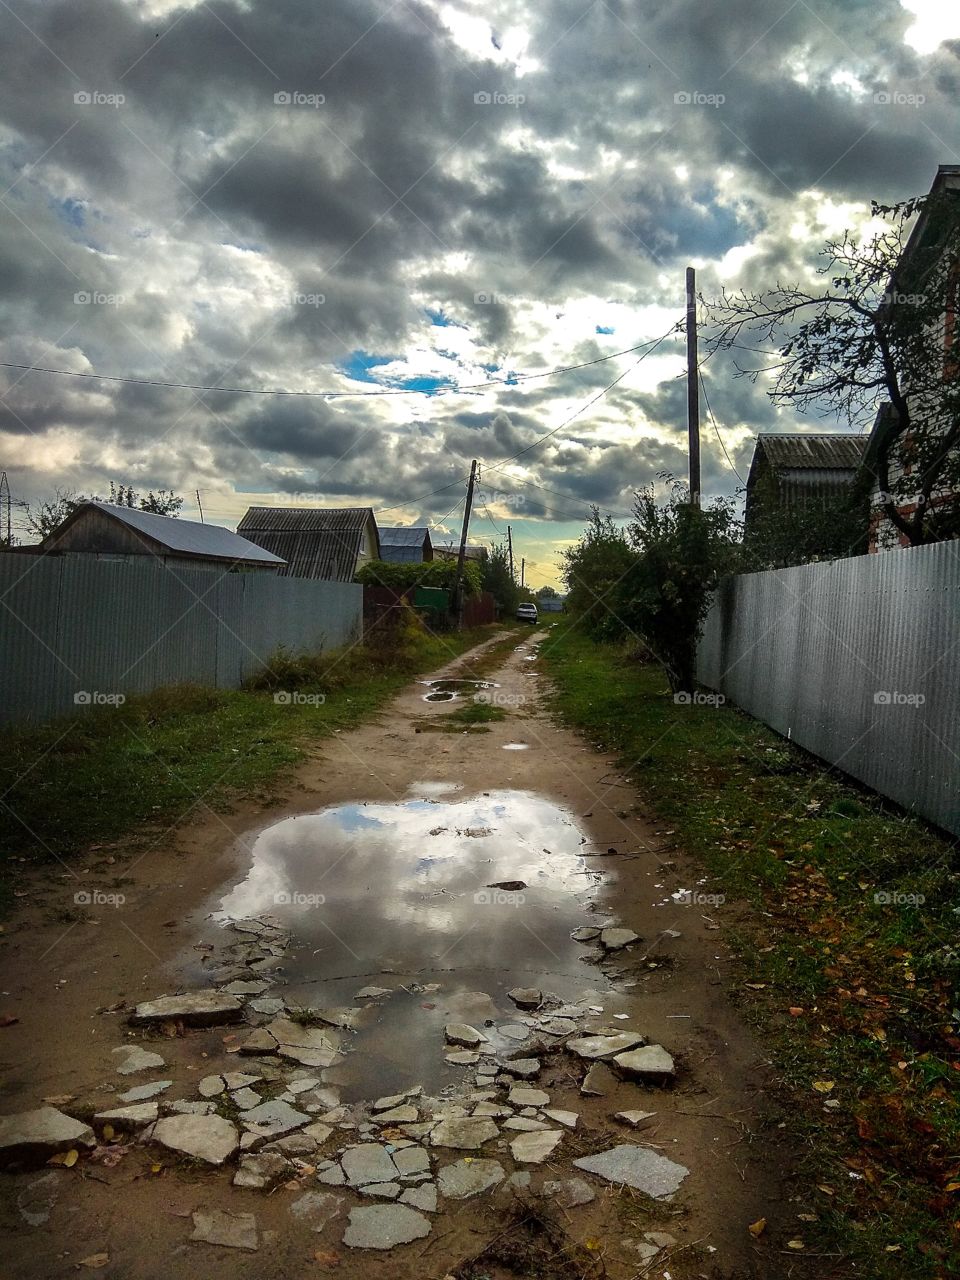 View of the road in the village and a puddle on this road, which reflects the cloudy sky, on a cloudy autumn evening